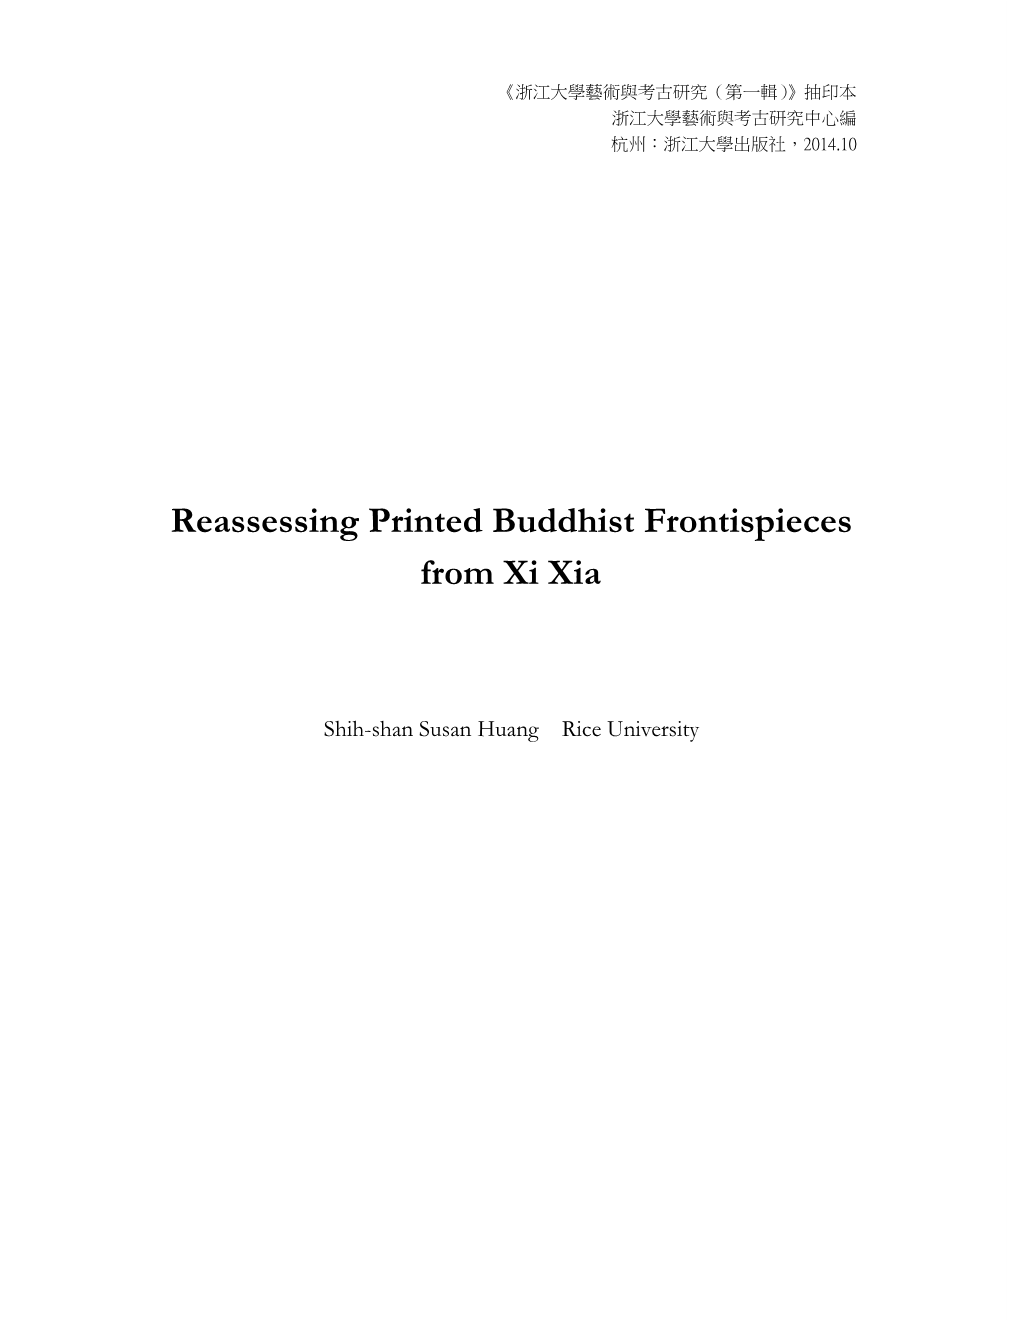 Reassessing Printed Buddhist Frontispieces from Xi Xia